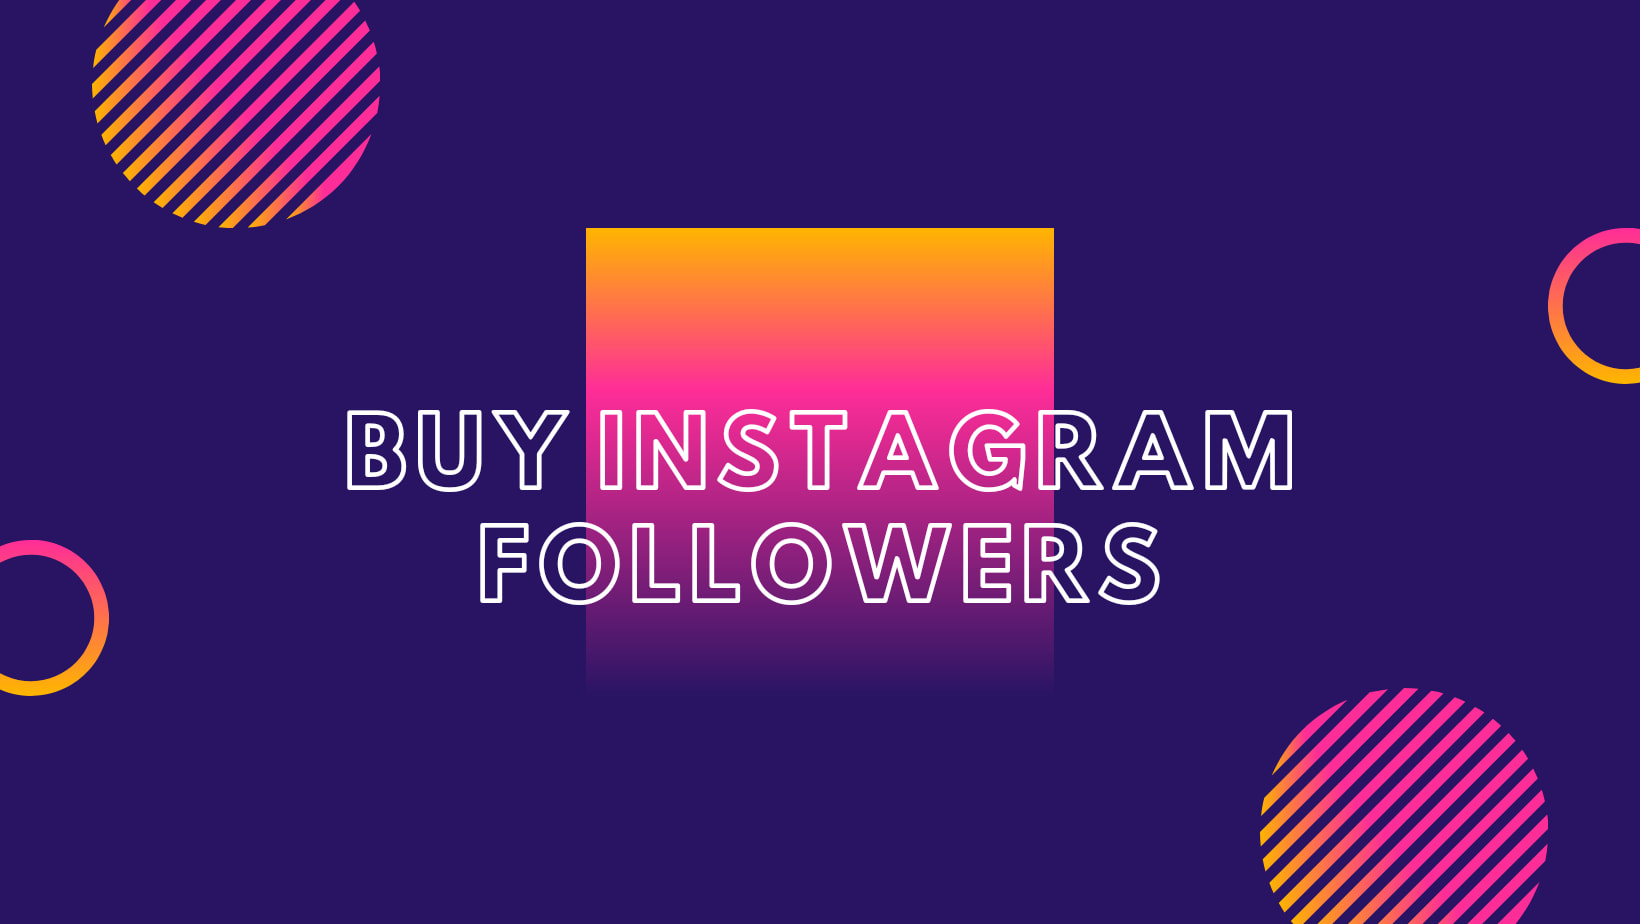 The Right Address to Buy Instagram Followers